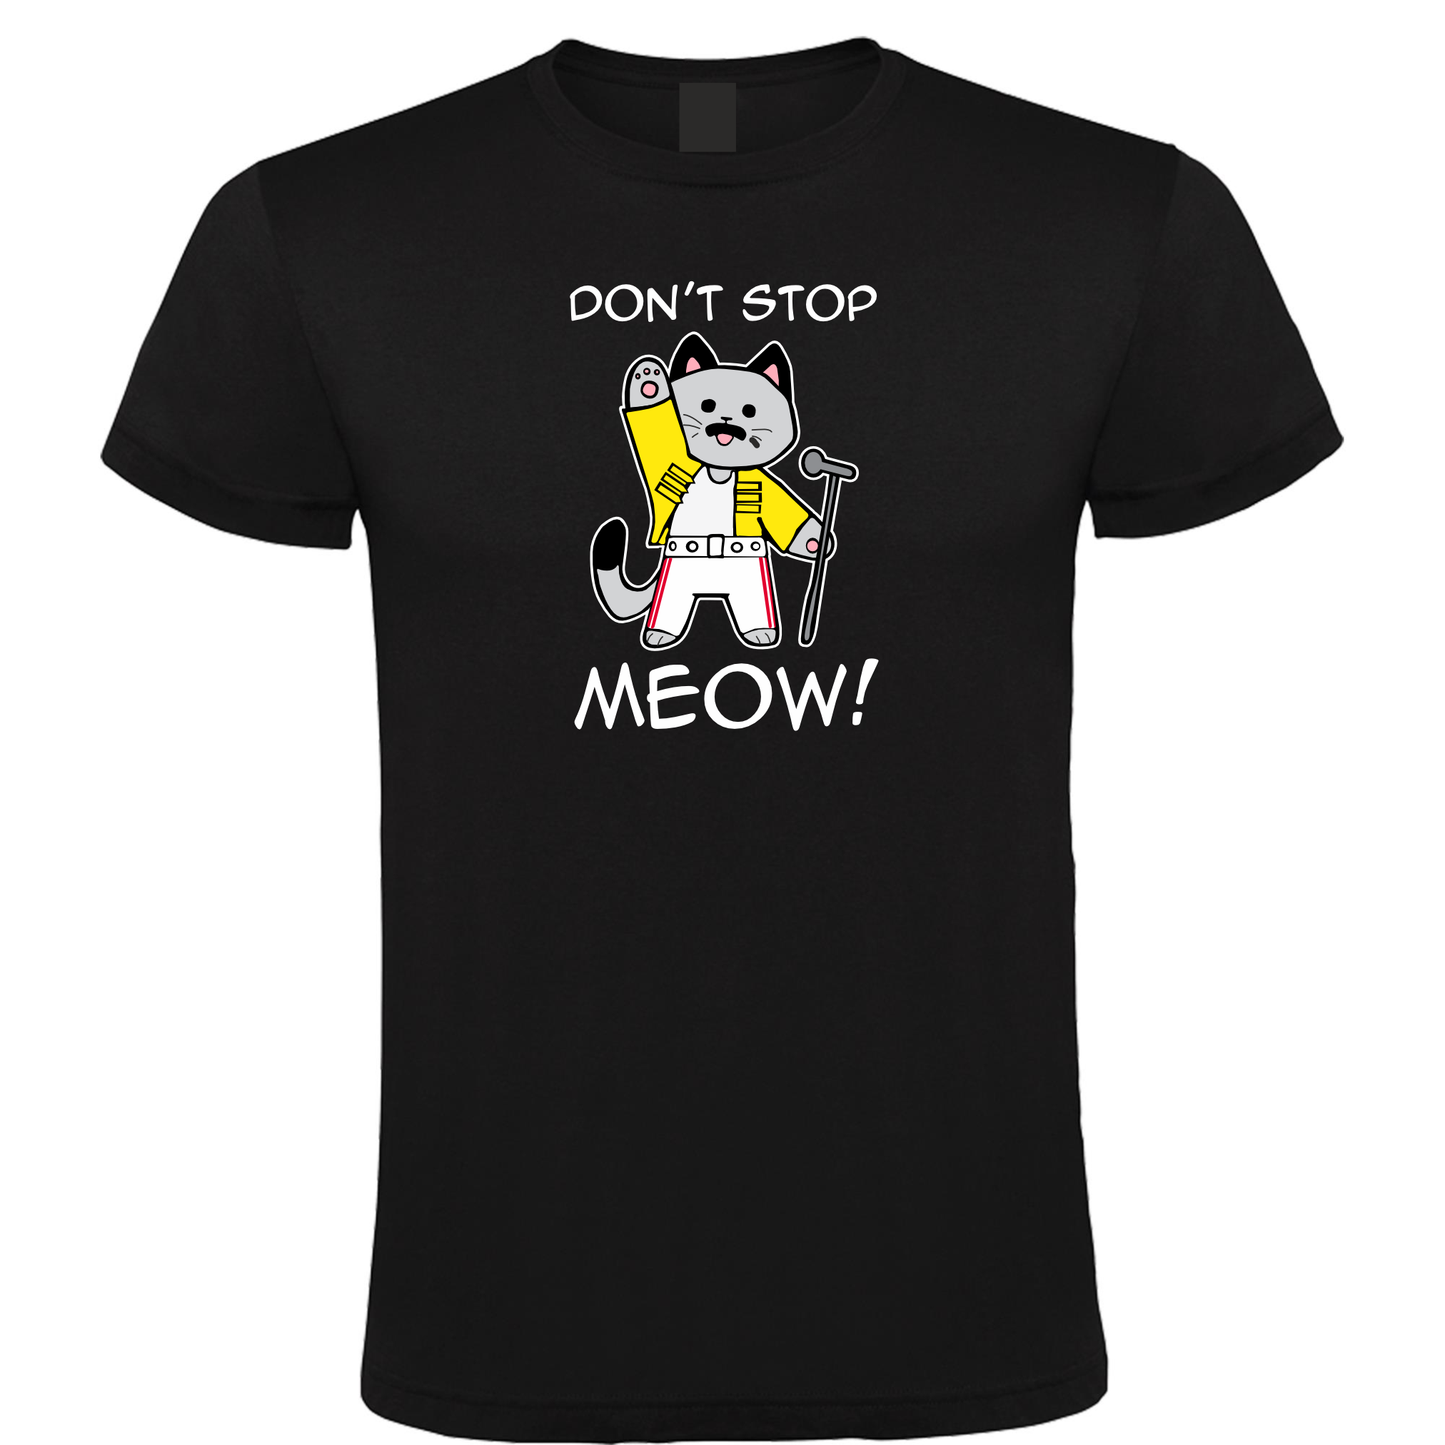 Don't Stop Meow!